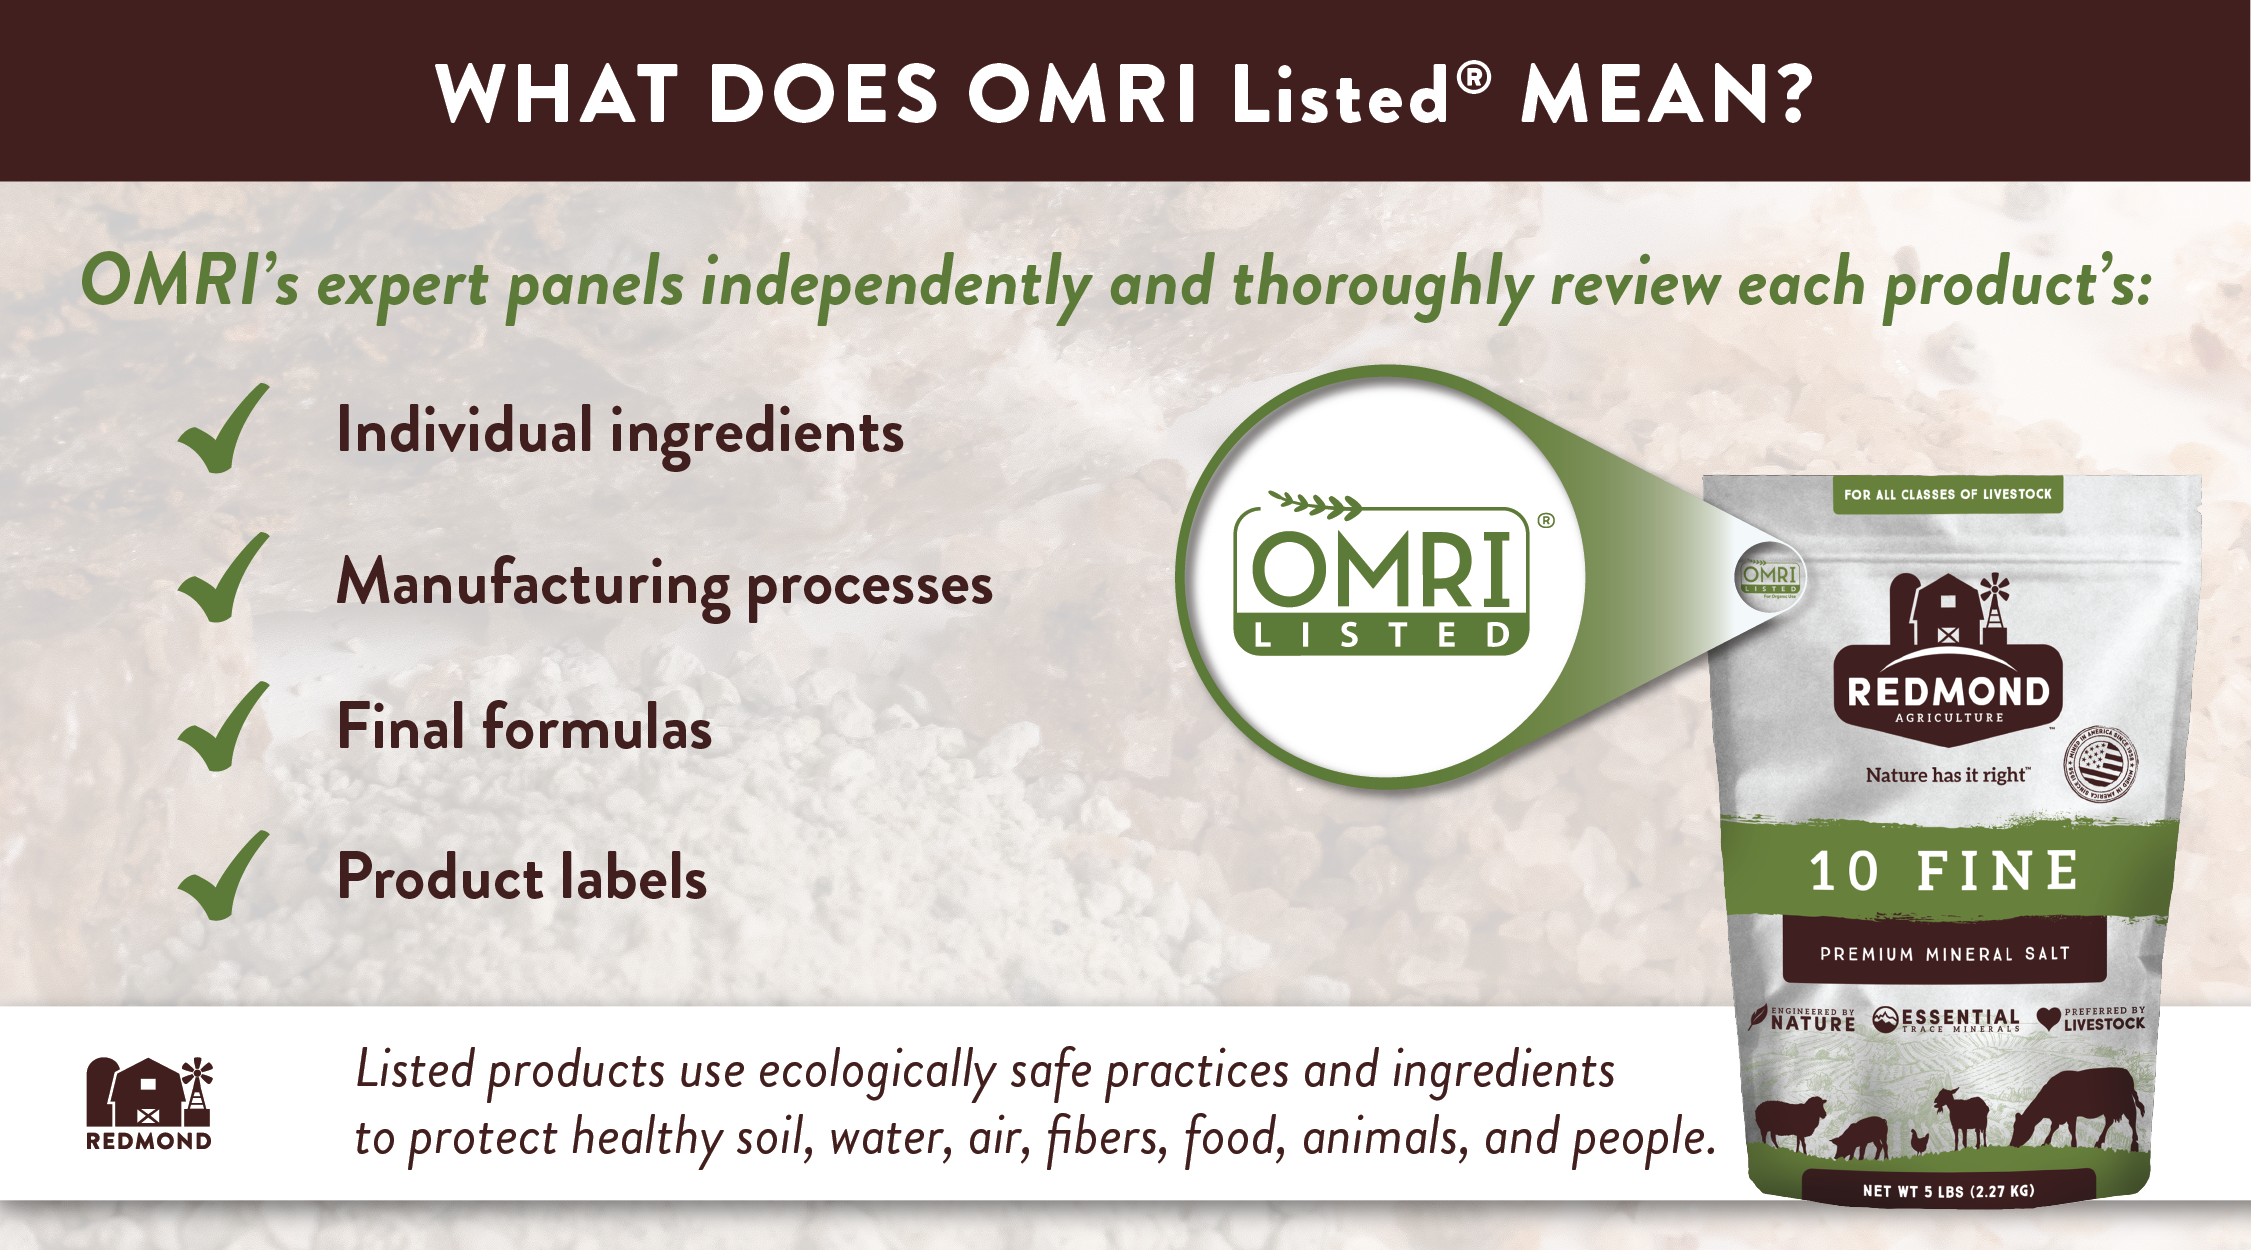 What does OMRI listed mean